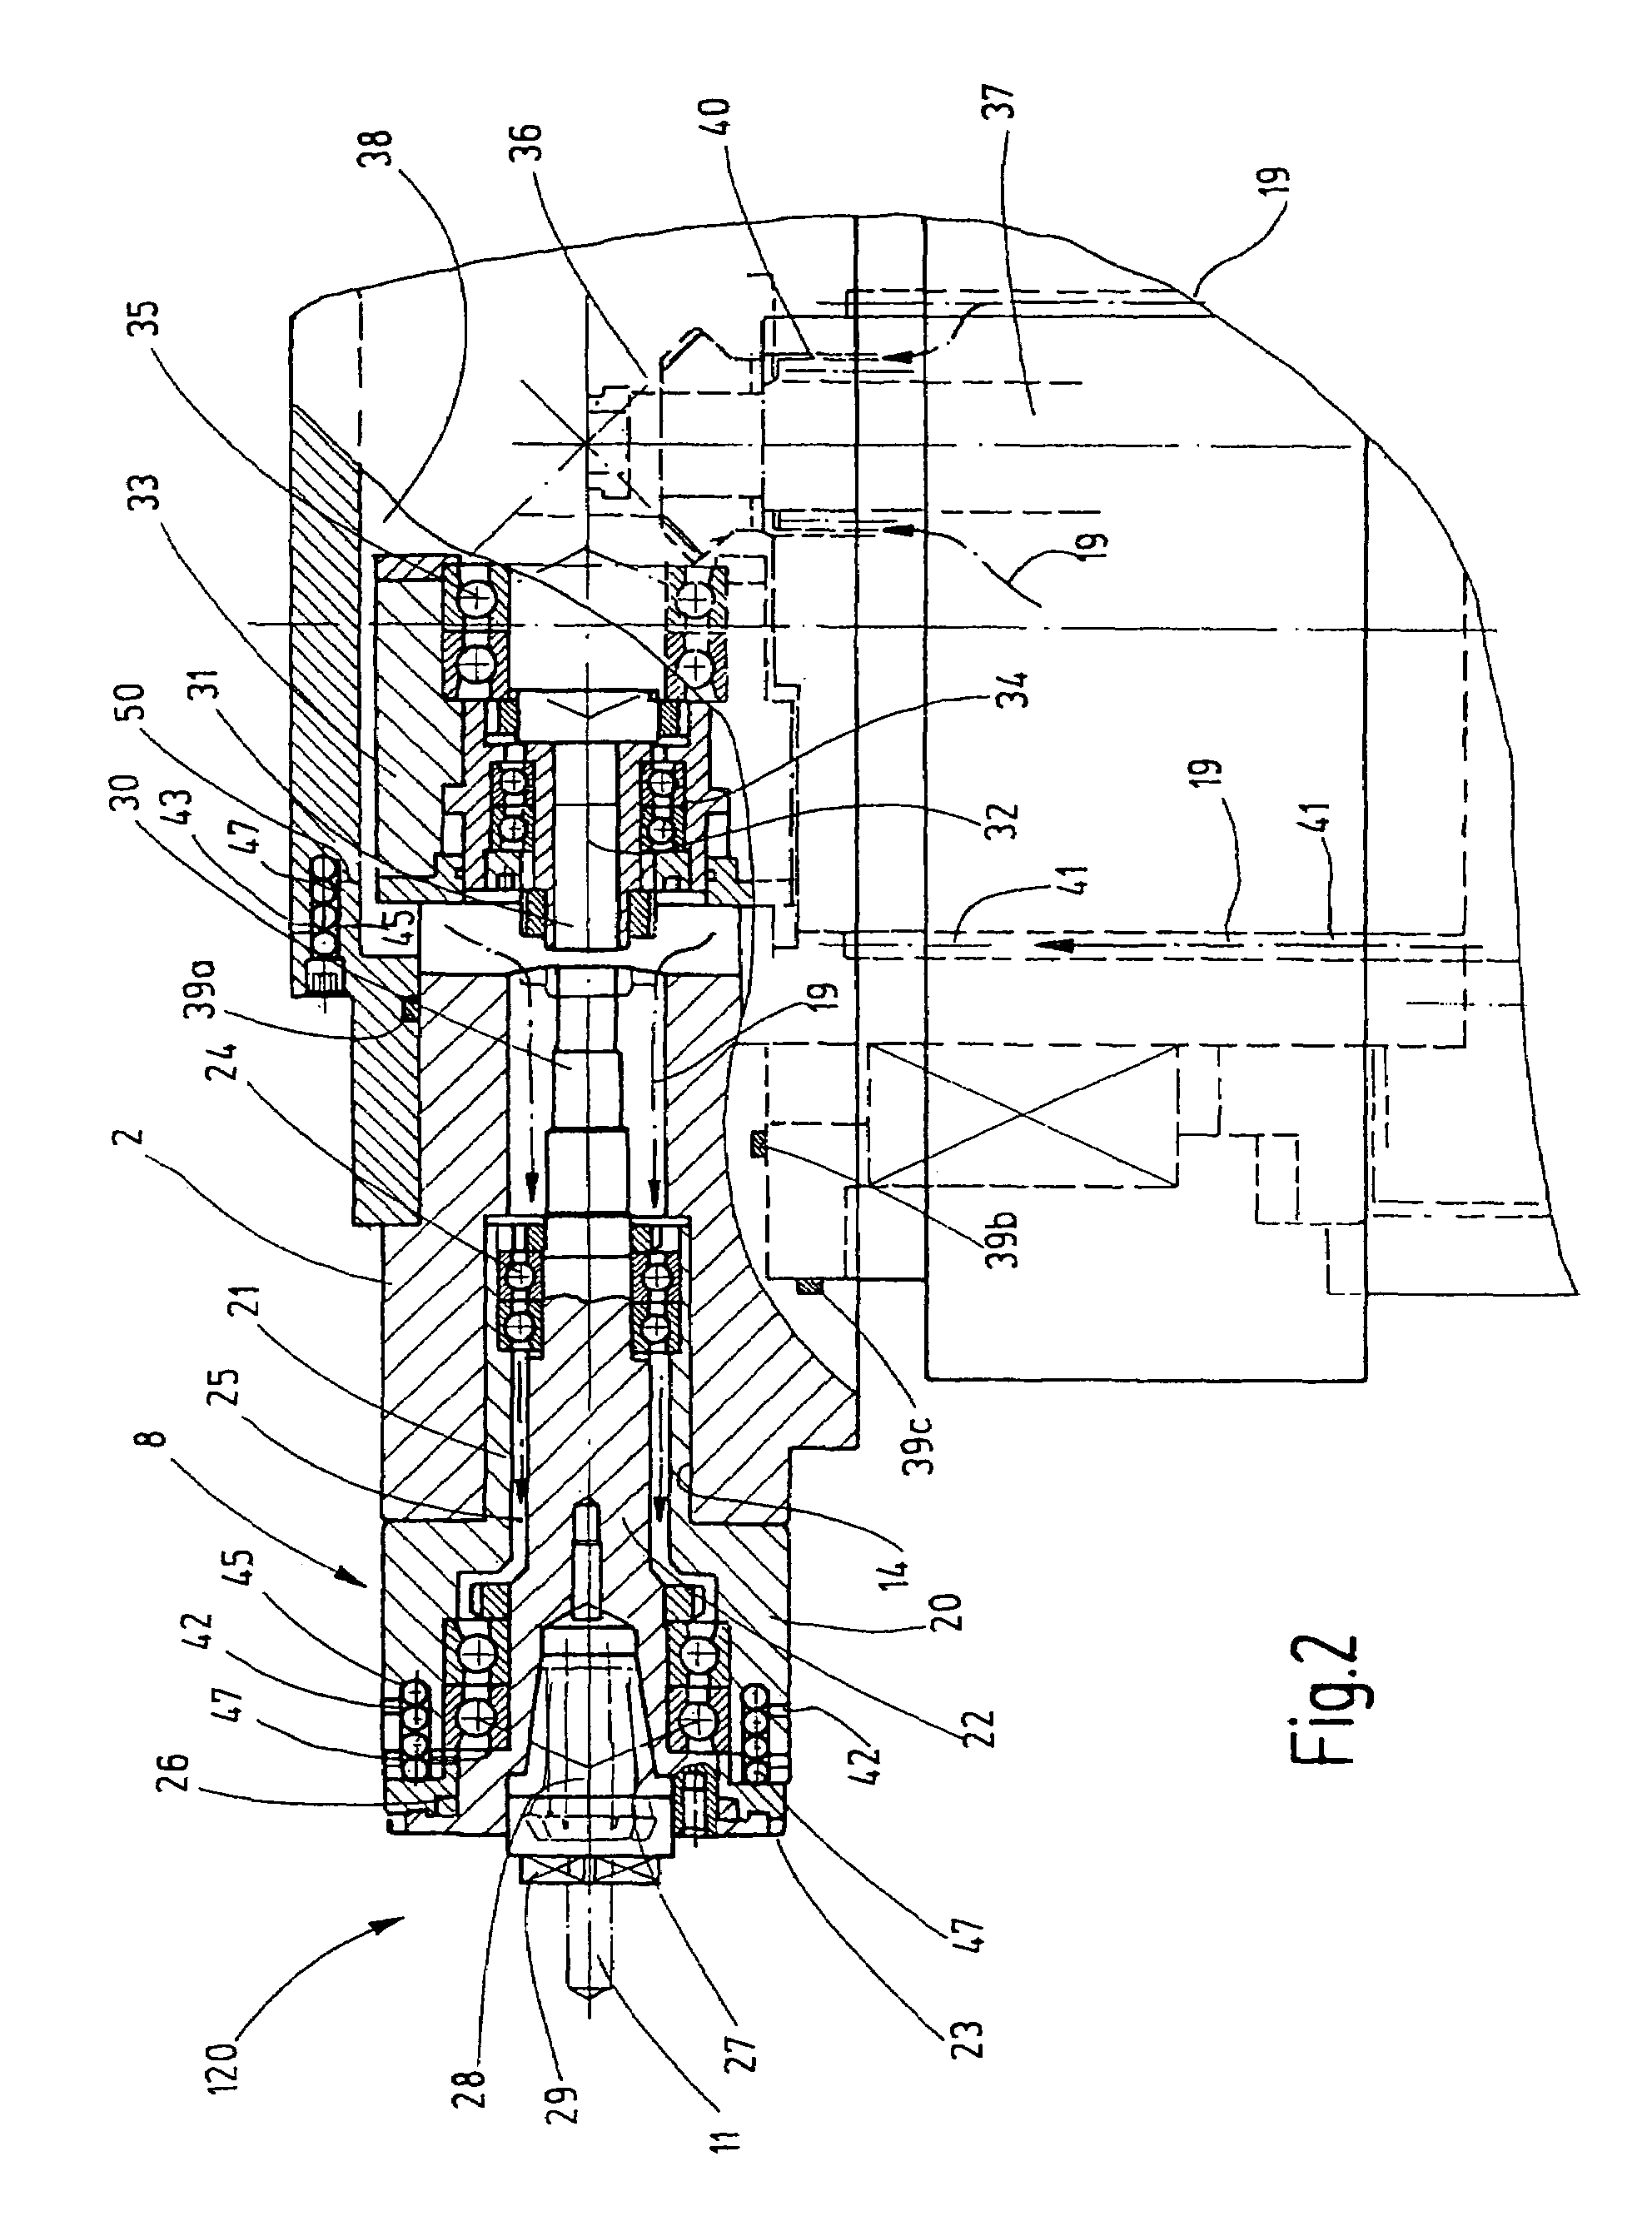 Method and device for lubricating bearing positions, especially in machine tools or their parts